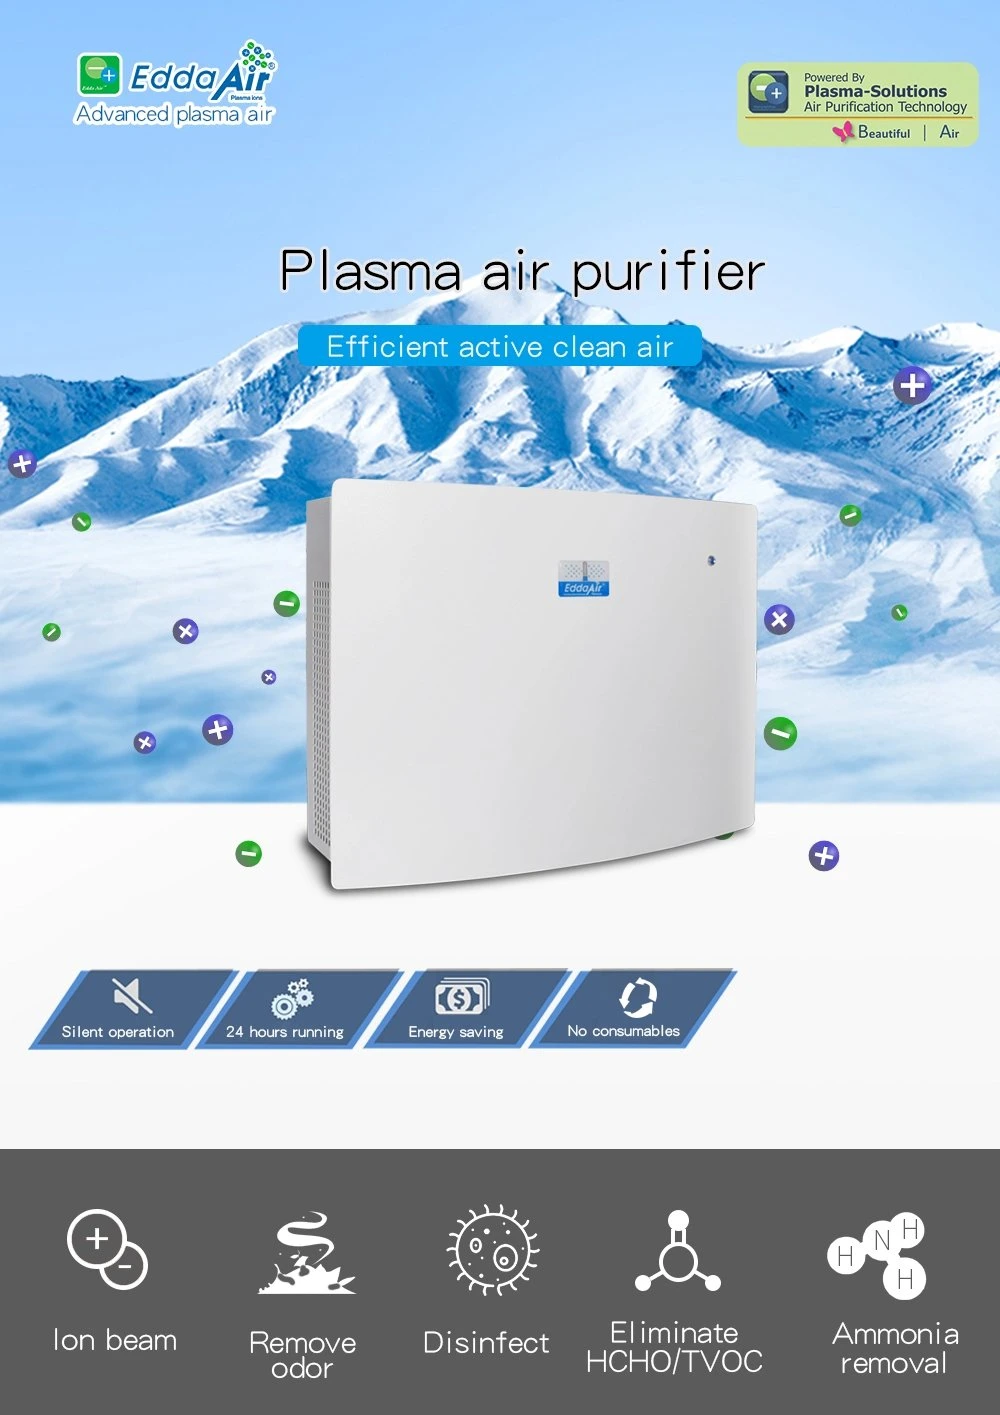 Plasma Technology Wall-Mounted Home Movable Air Filter Air Cleaner Air Purifier with HEPA Filter